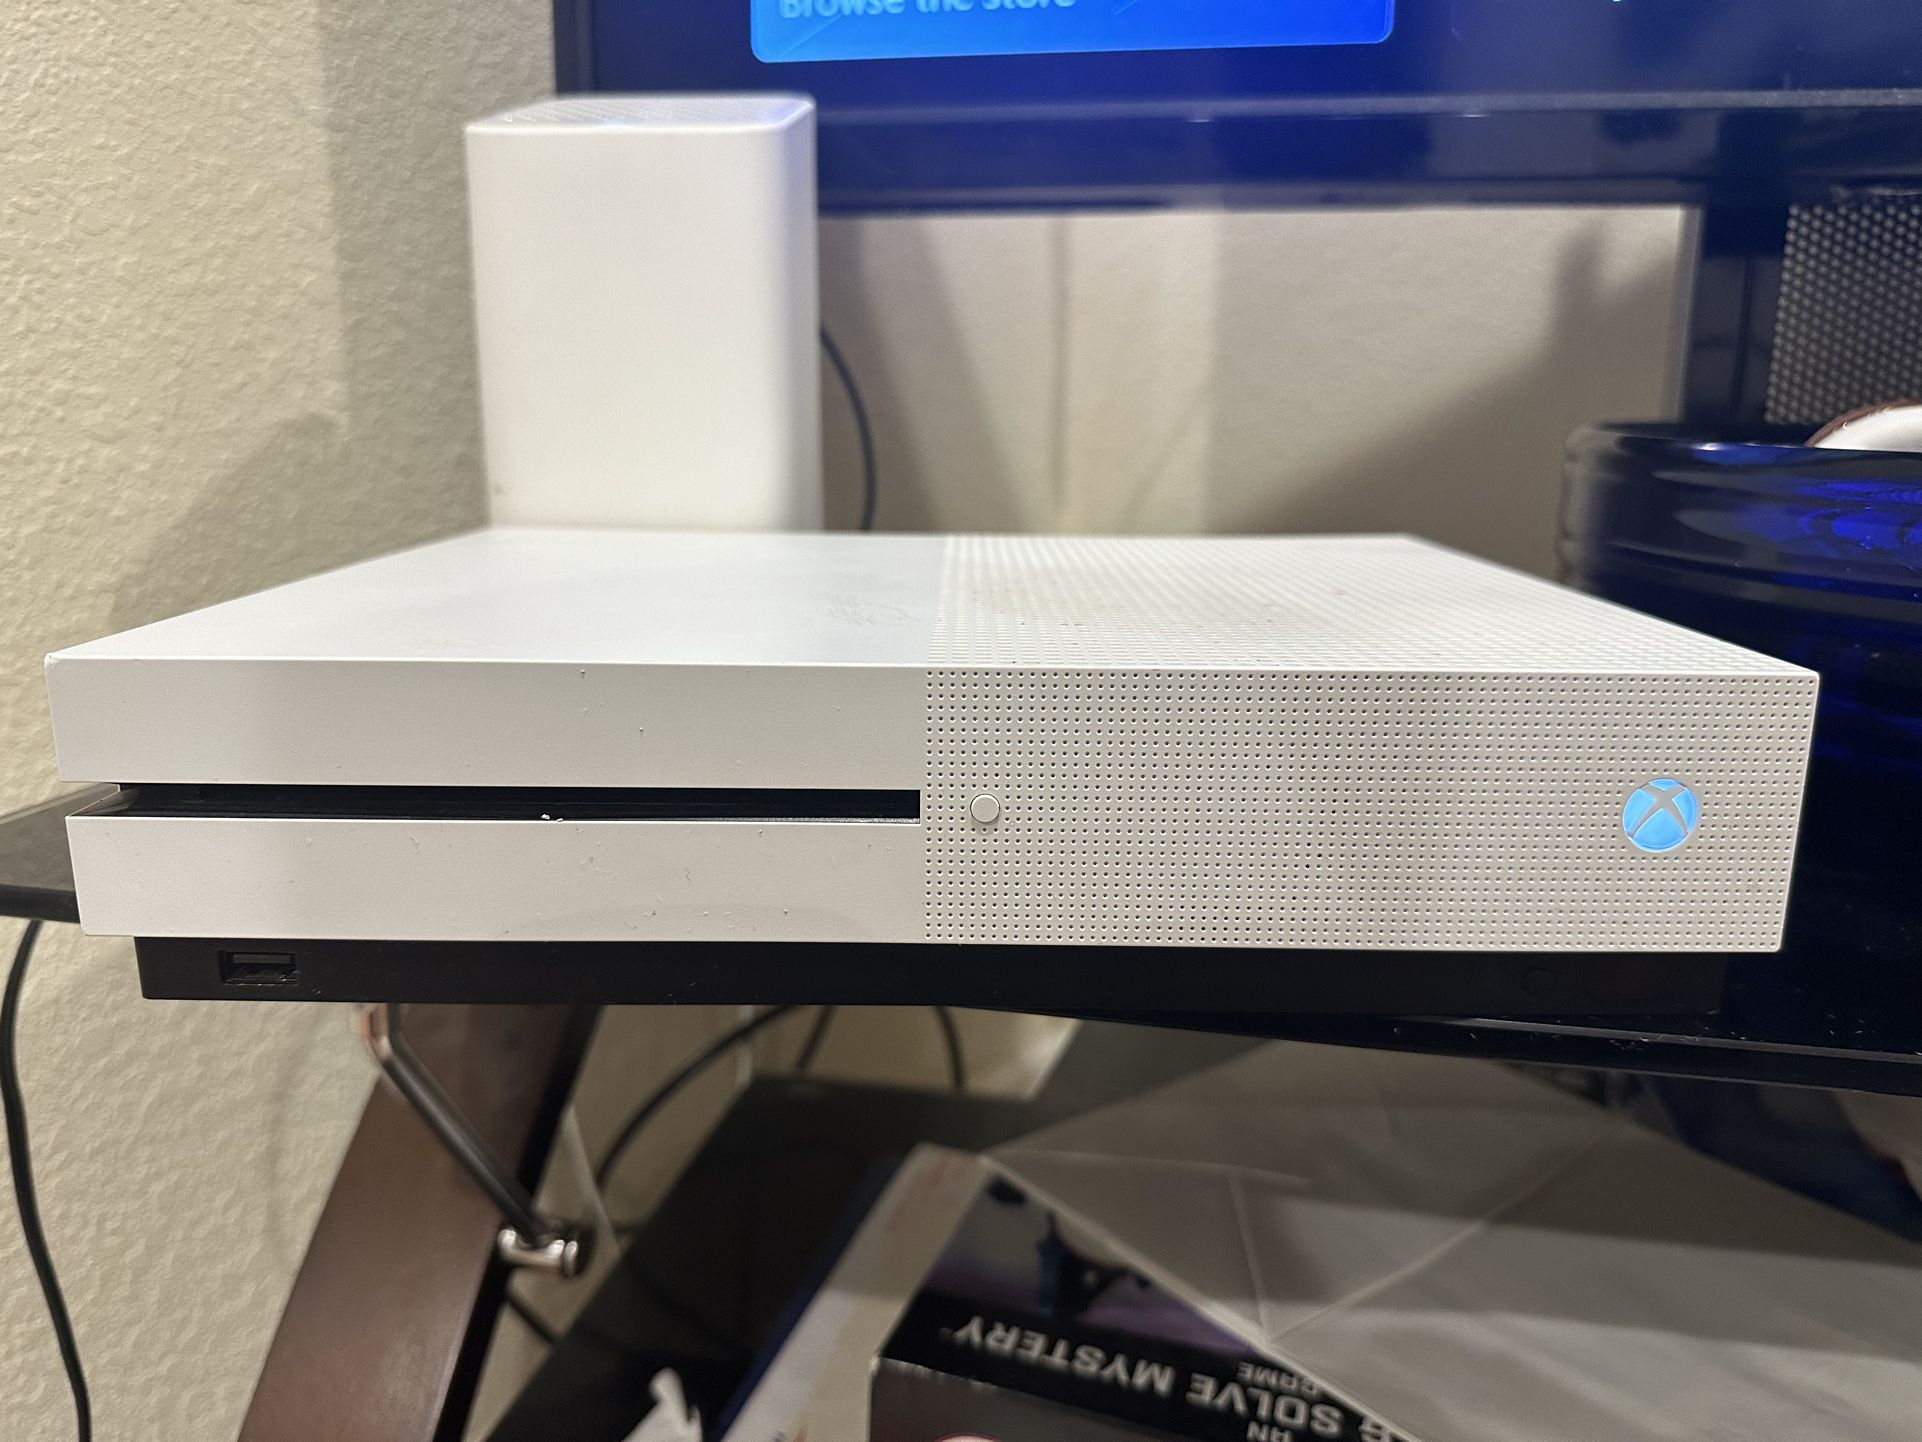 Xbox One S (W/ HDMI, Power Cord, and Controller)